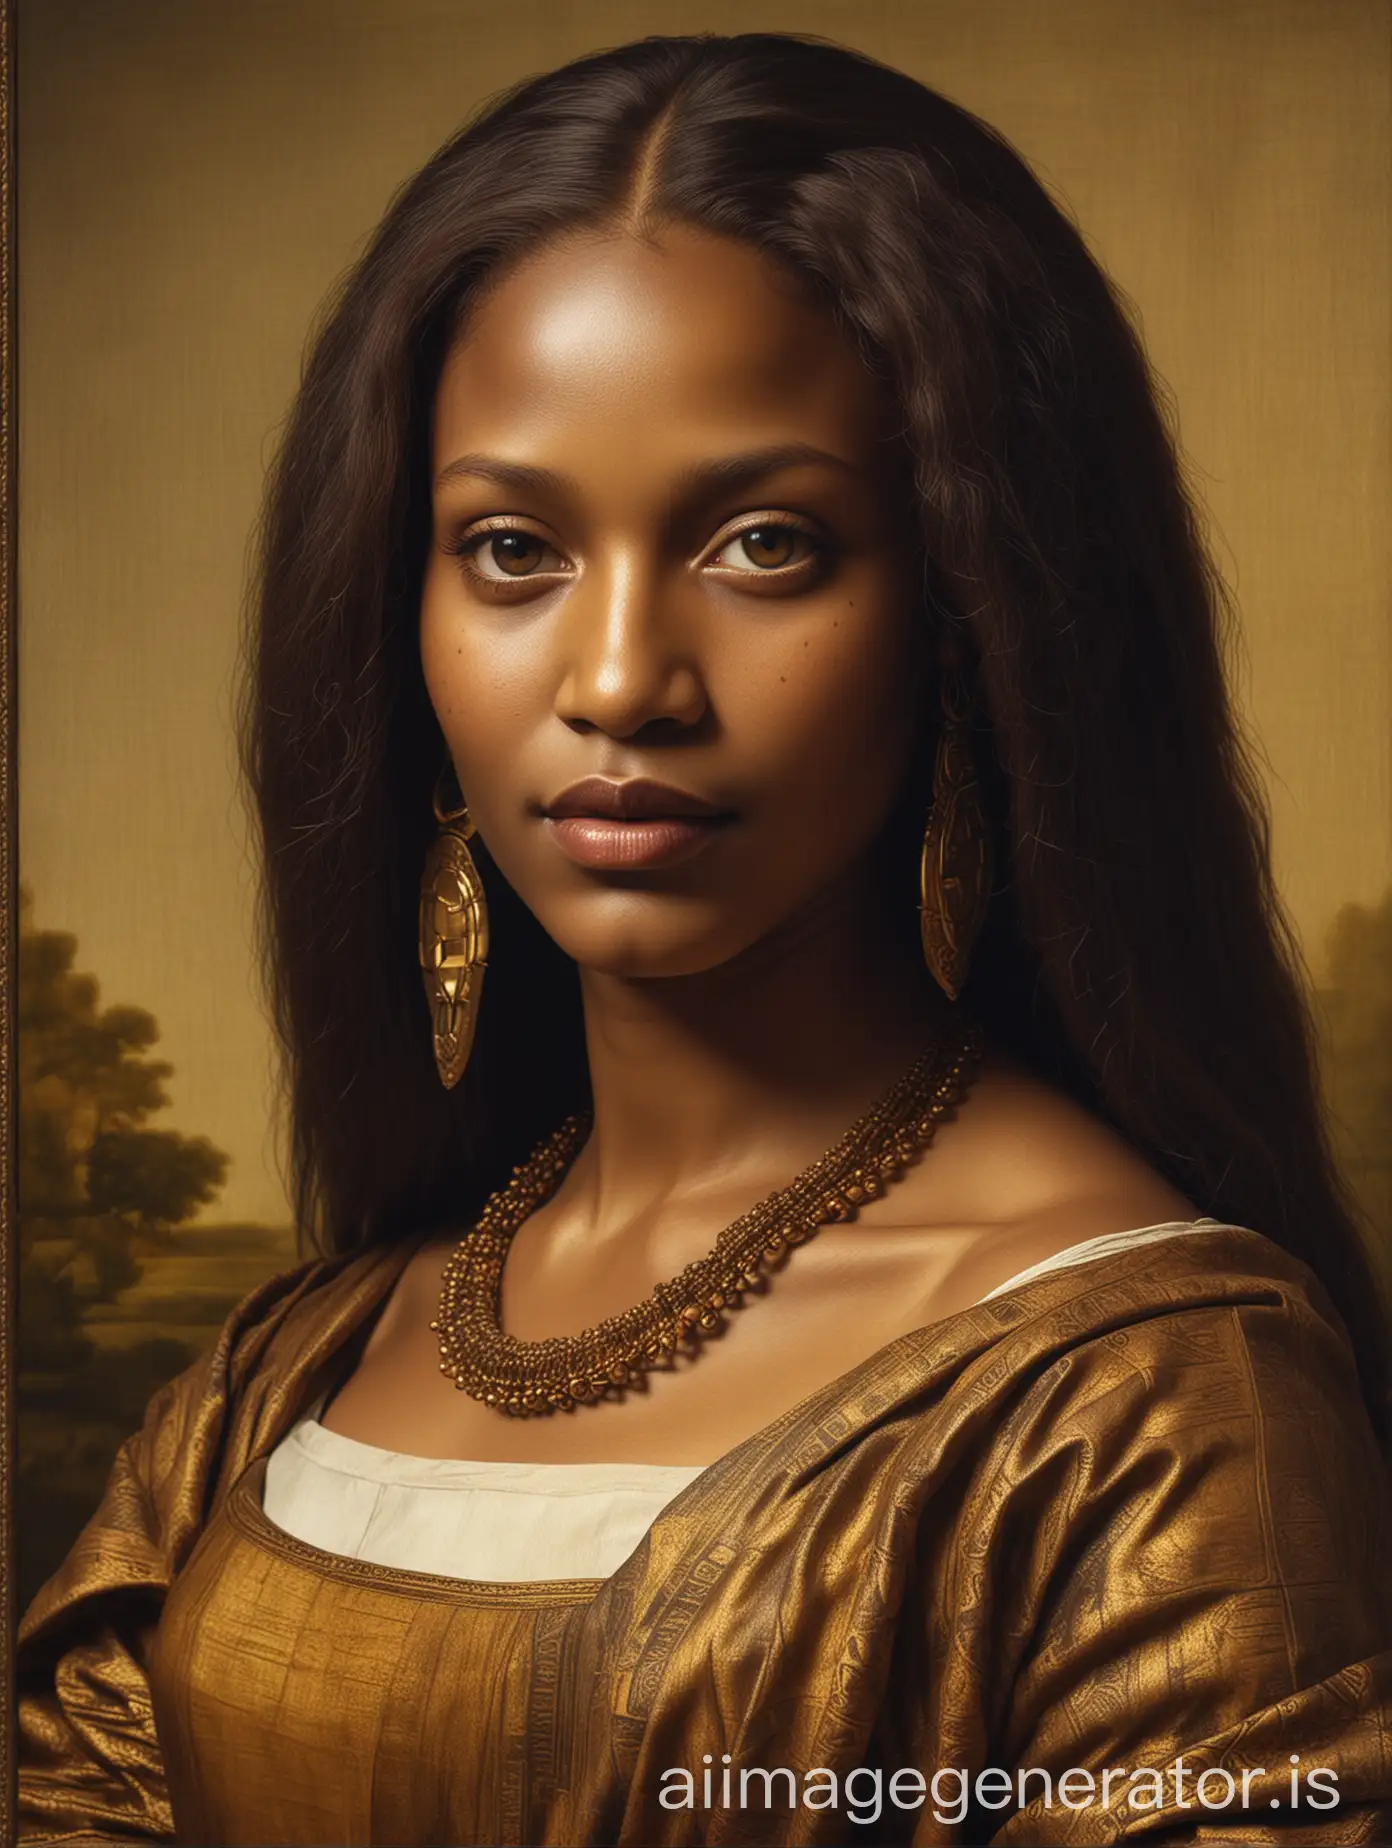 reimagine the monal lisa as mama african woman


